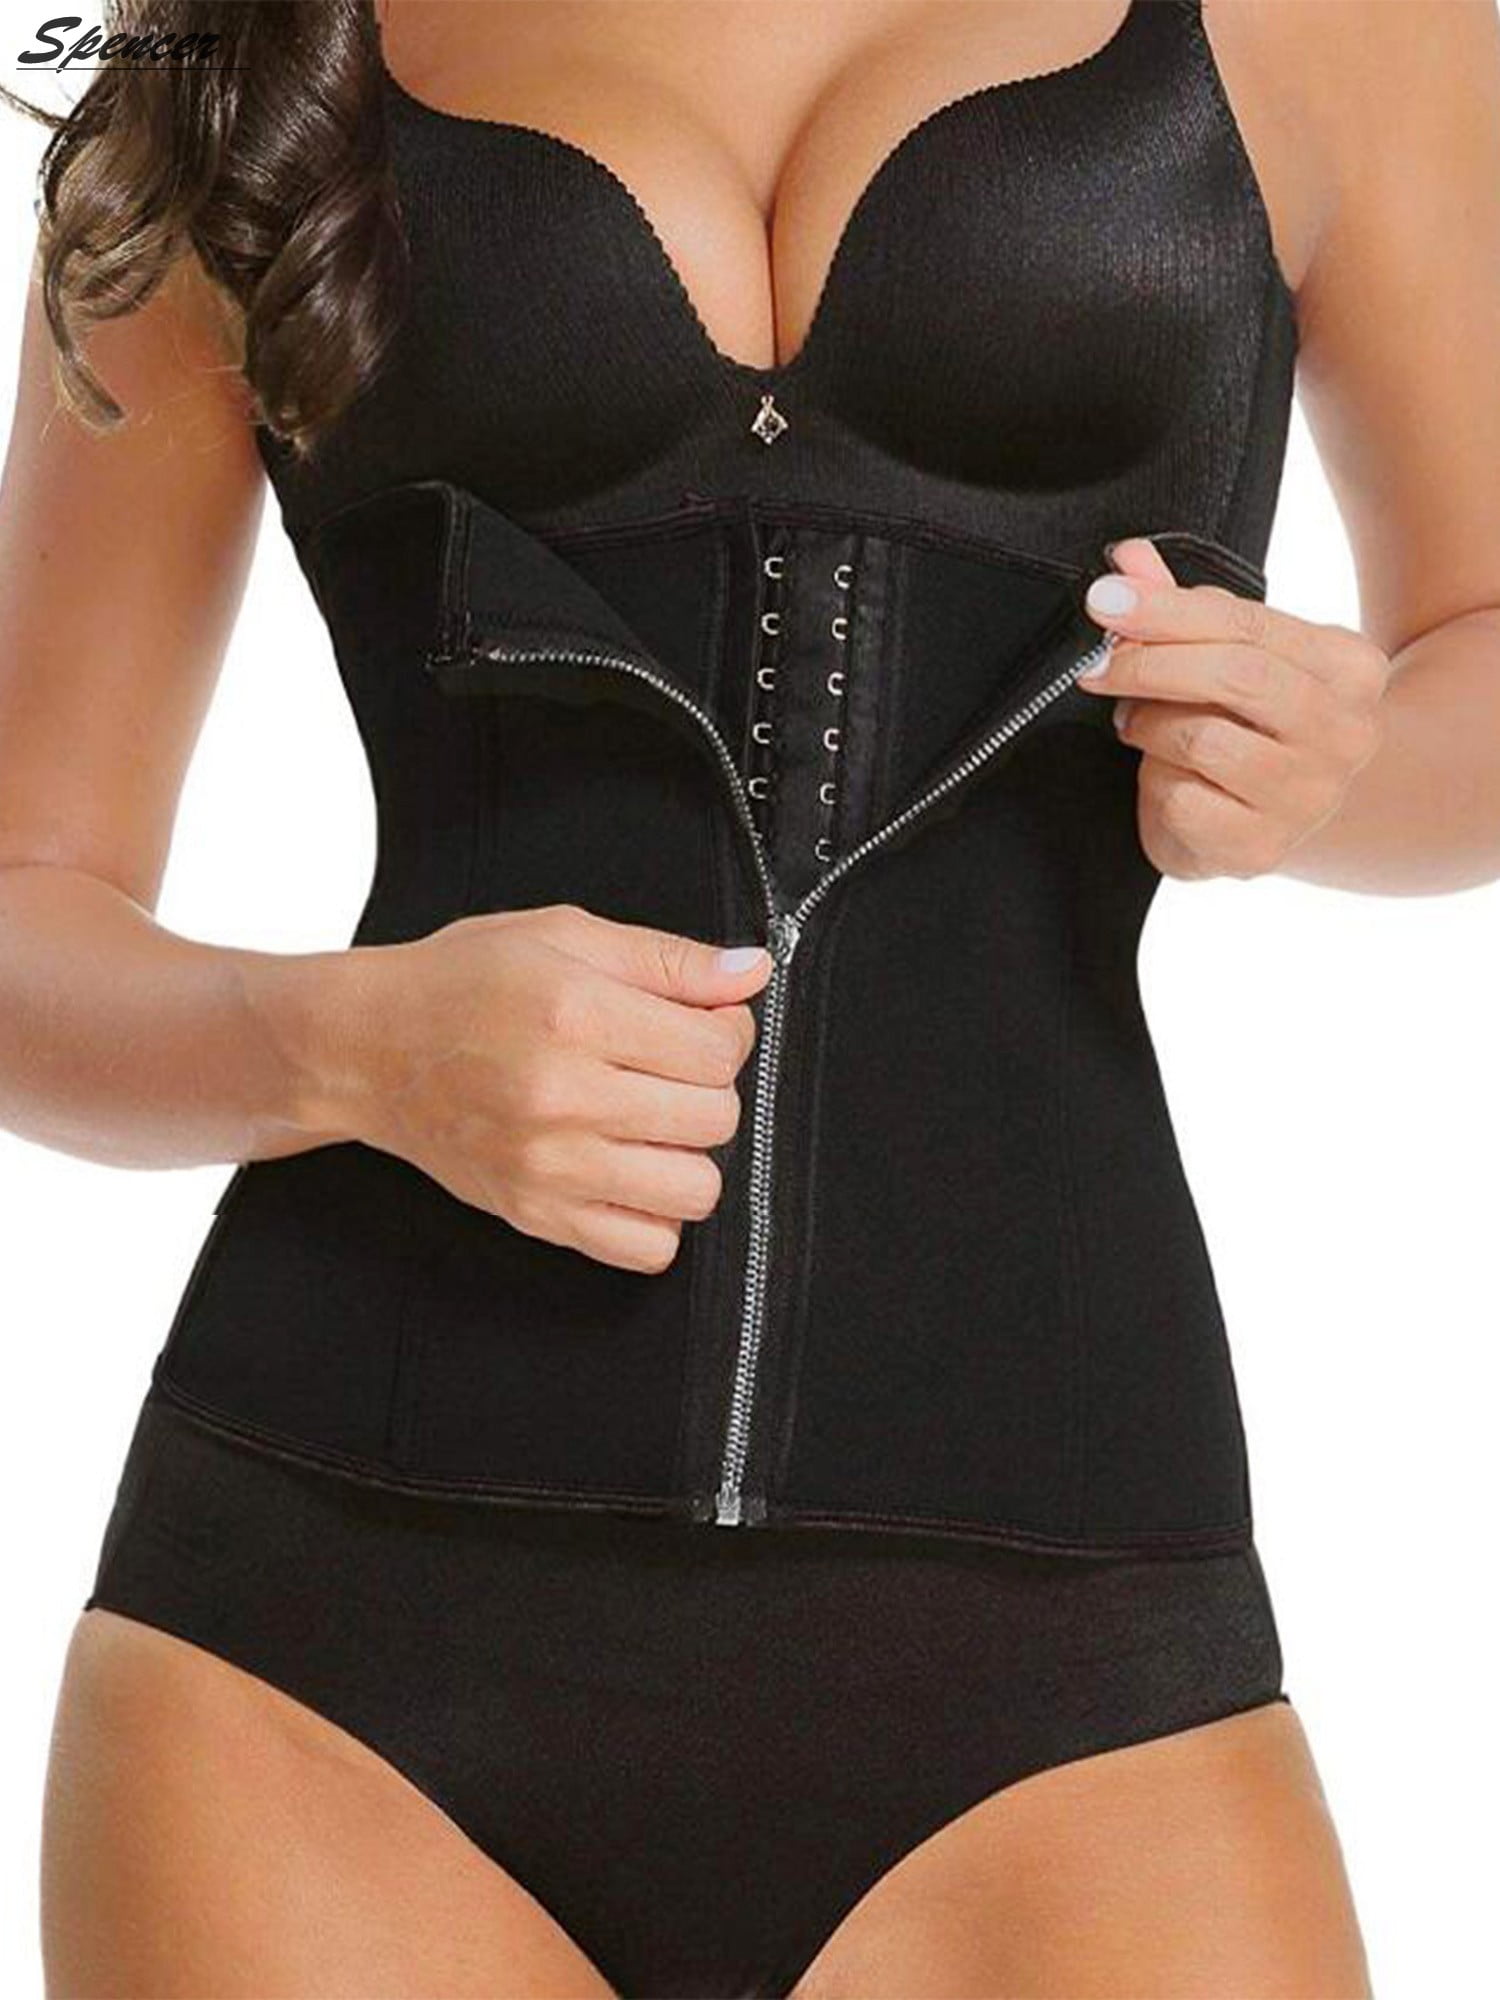 Youloveit Waist Trainer Corset Breathable and Invisible Waist Shaper Training Waist Tightener for Female Abdominal Control, Women's, Size: Small